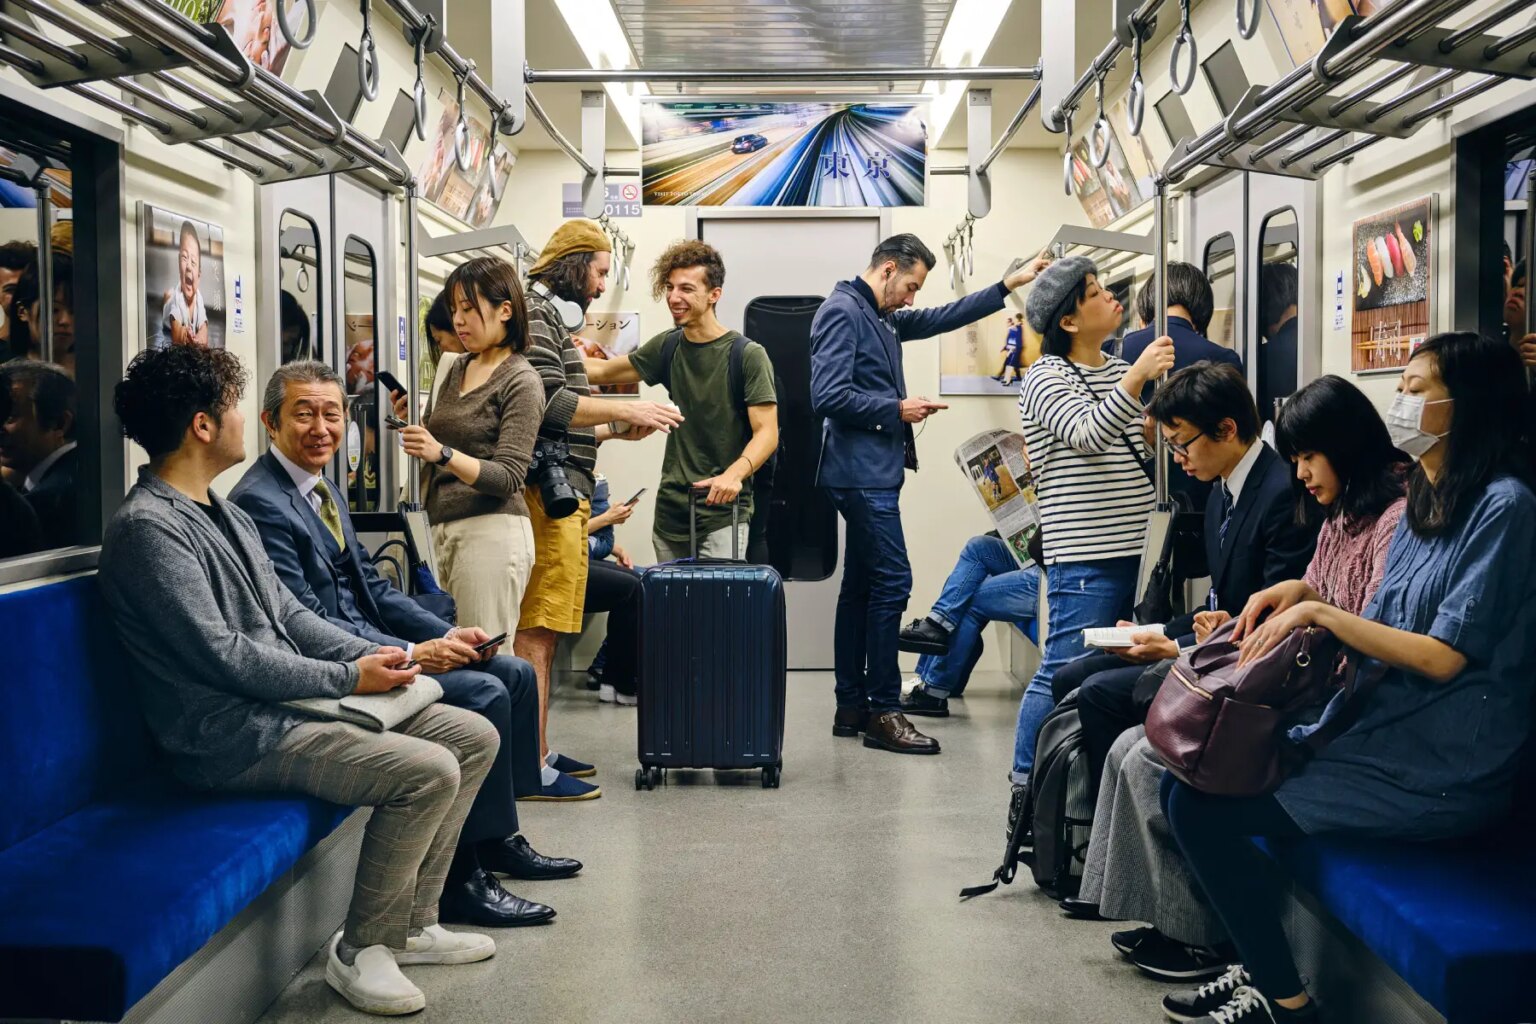 A crowd of passengers sitting and standing in a Japanese subway train